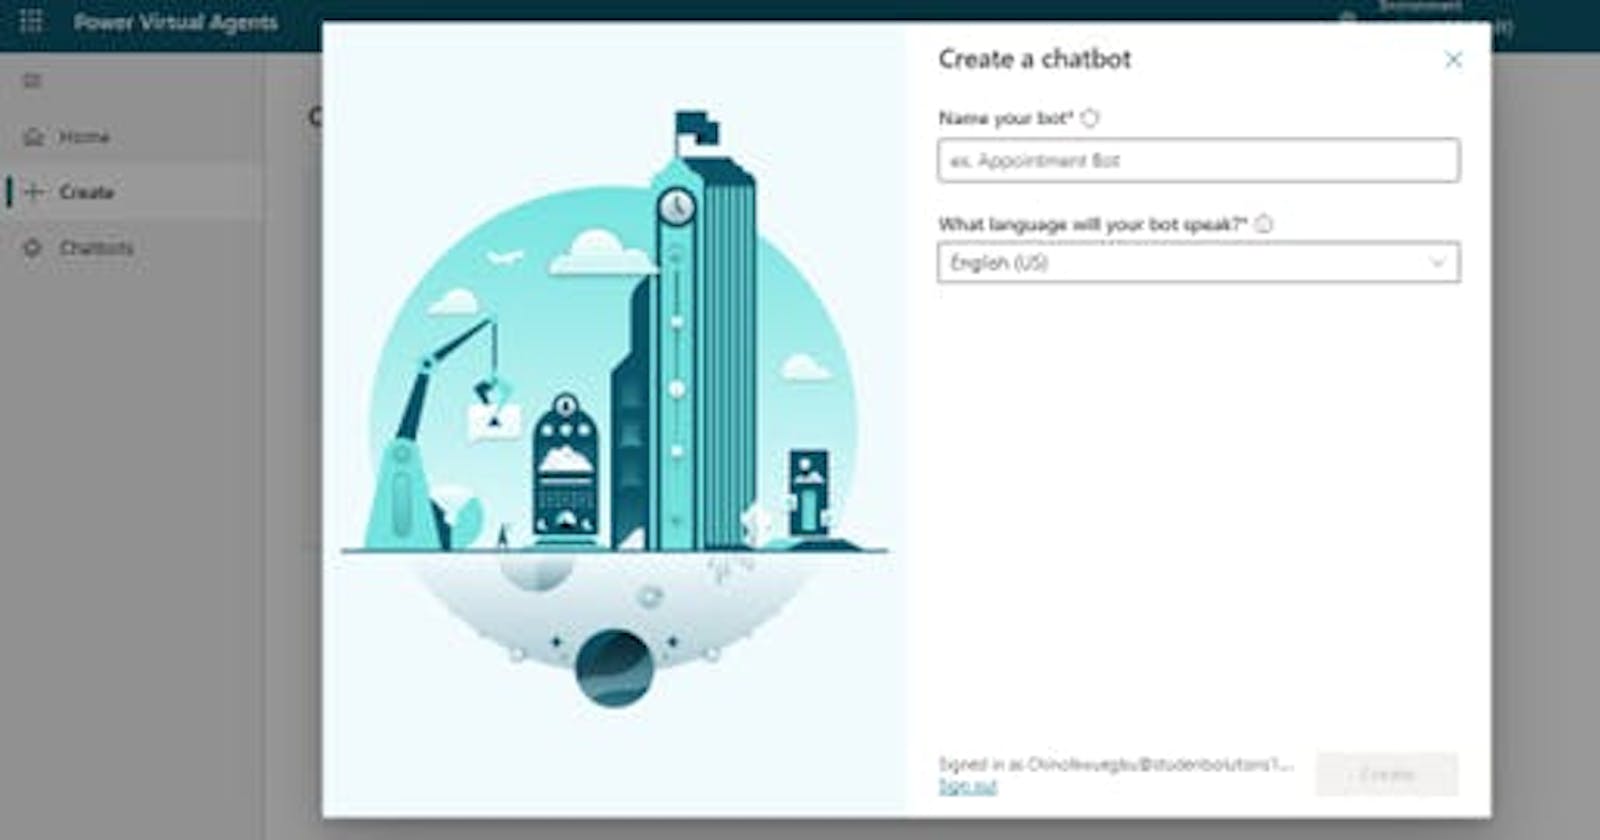 Building a ChatBot With Microsoft Power Virtual Agents